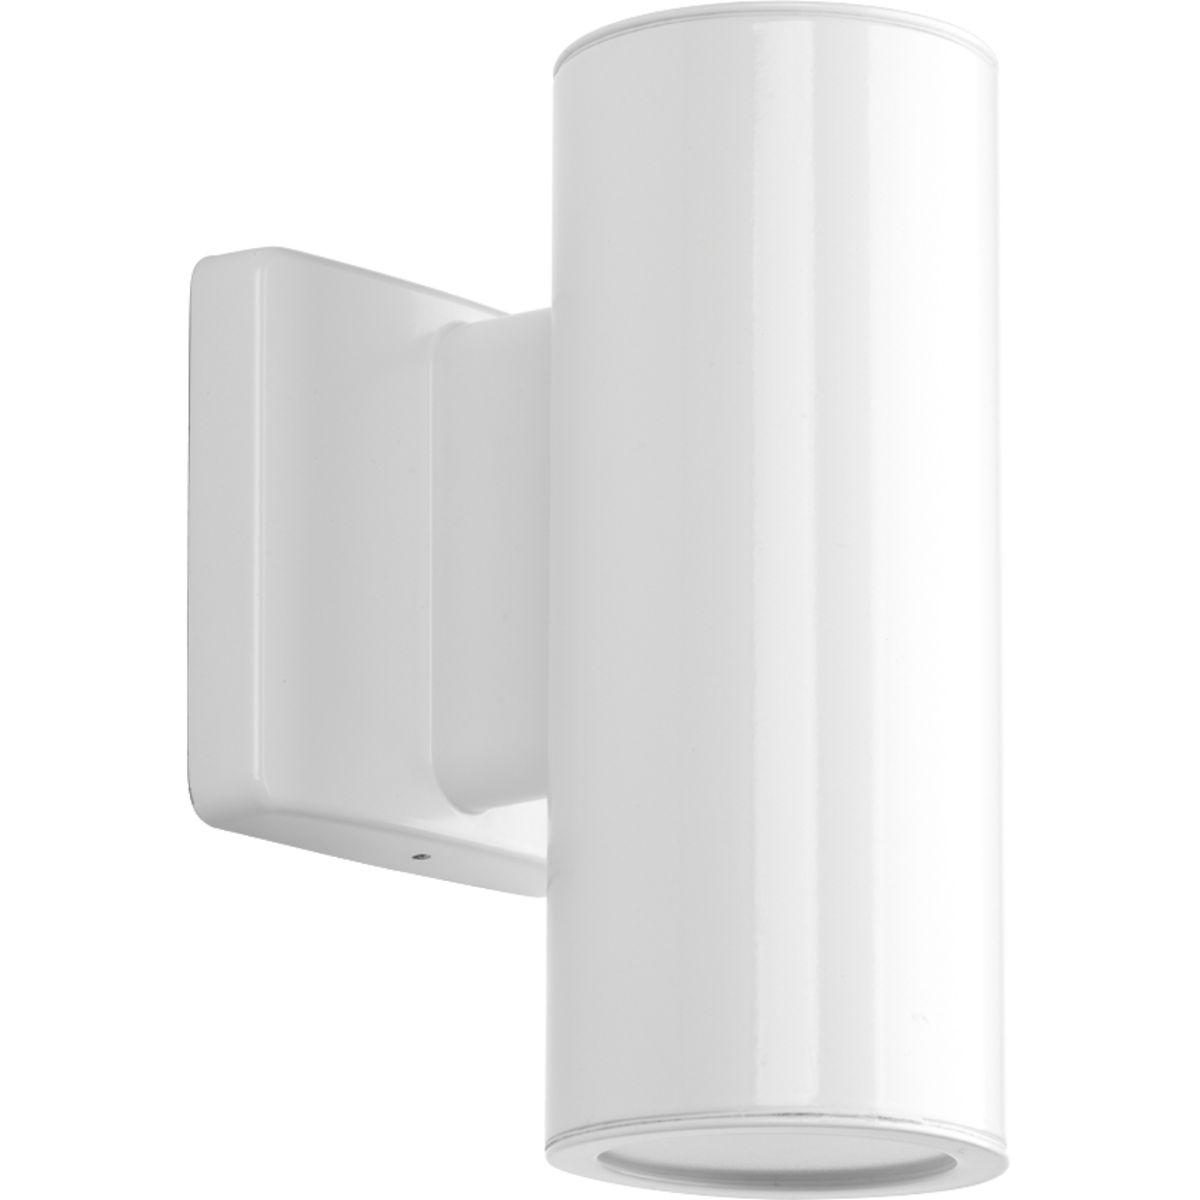 Hubbell P563001-030-30K Sleek, 3" LED cylindrical wall lantern with up/downlight in elegant White finish. Die-cast aluminum wall brackets and heavy-duty aluminum framing. Fade and chip-resistant. UL listed for wet locations. Can be used indoor or outdoor.  ; 3" LED wall mount up